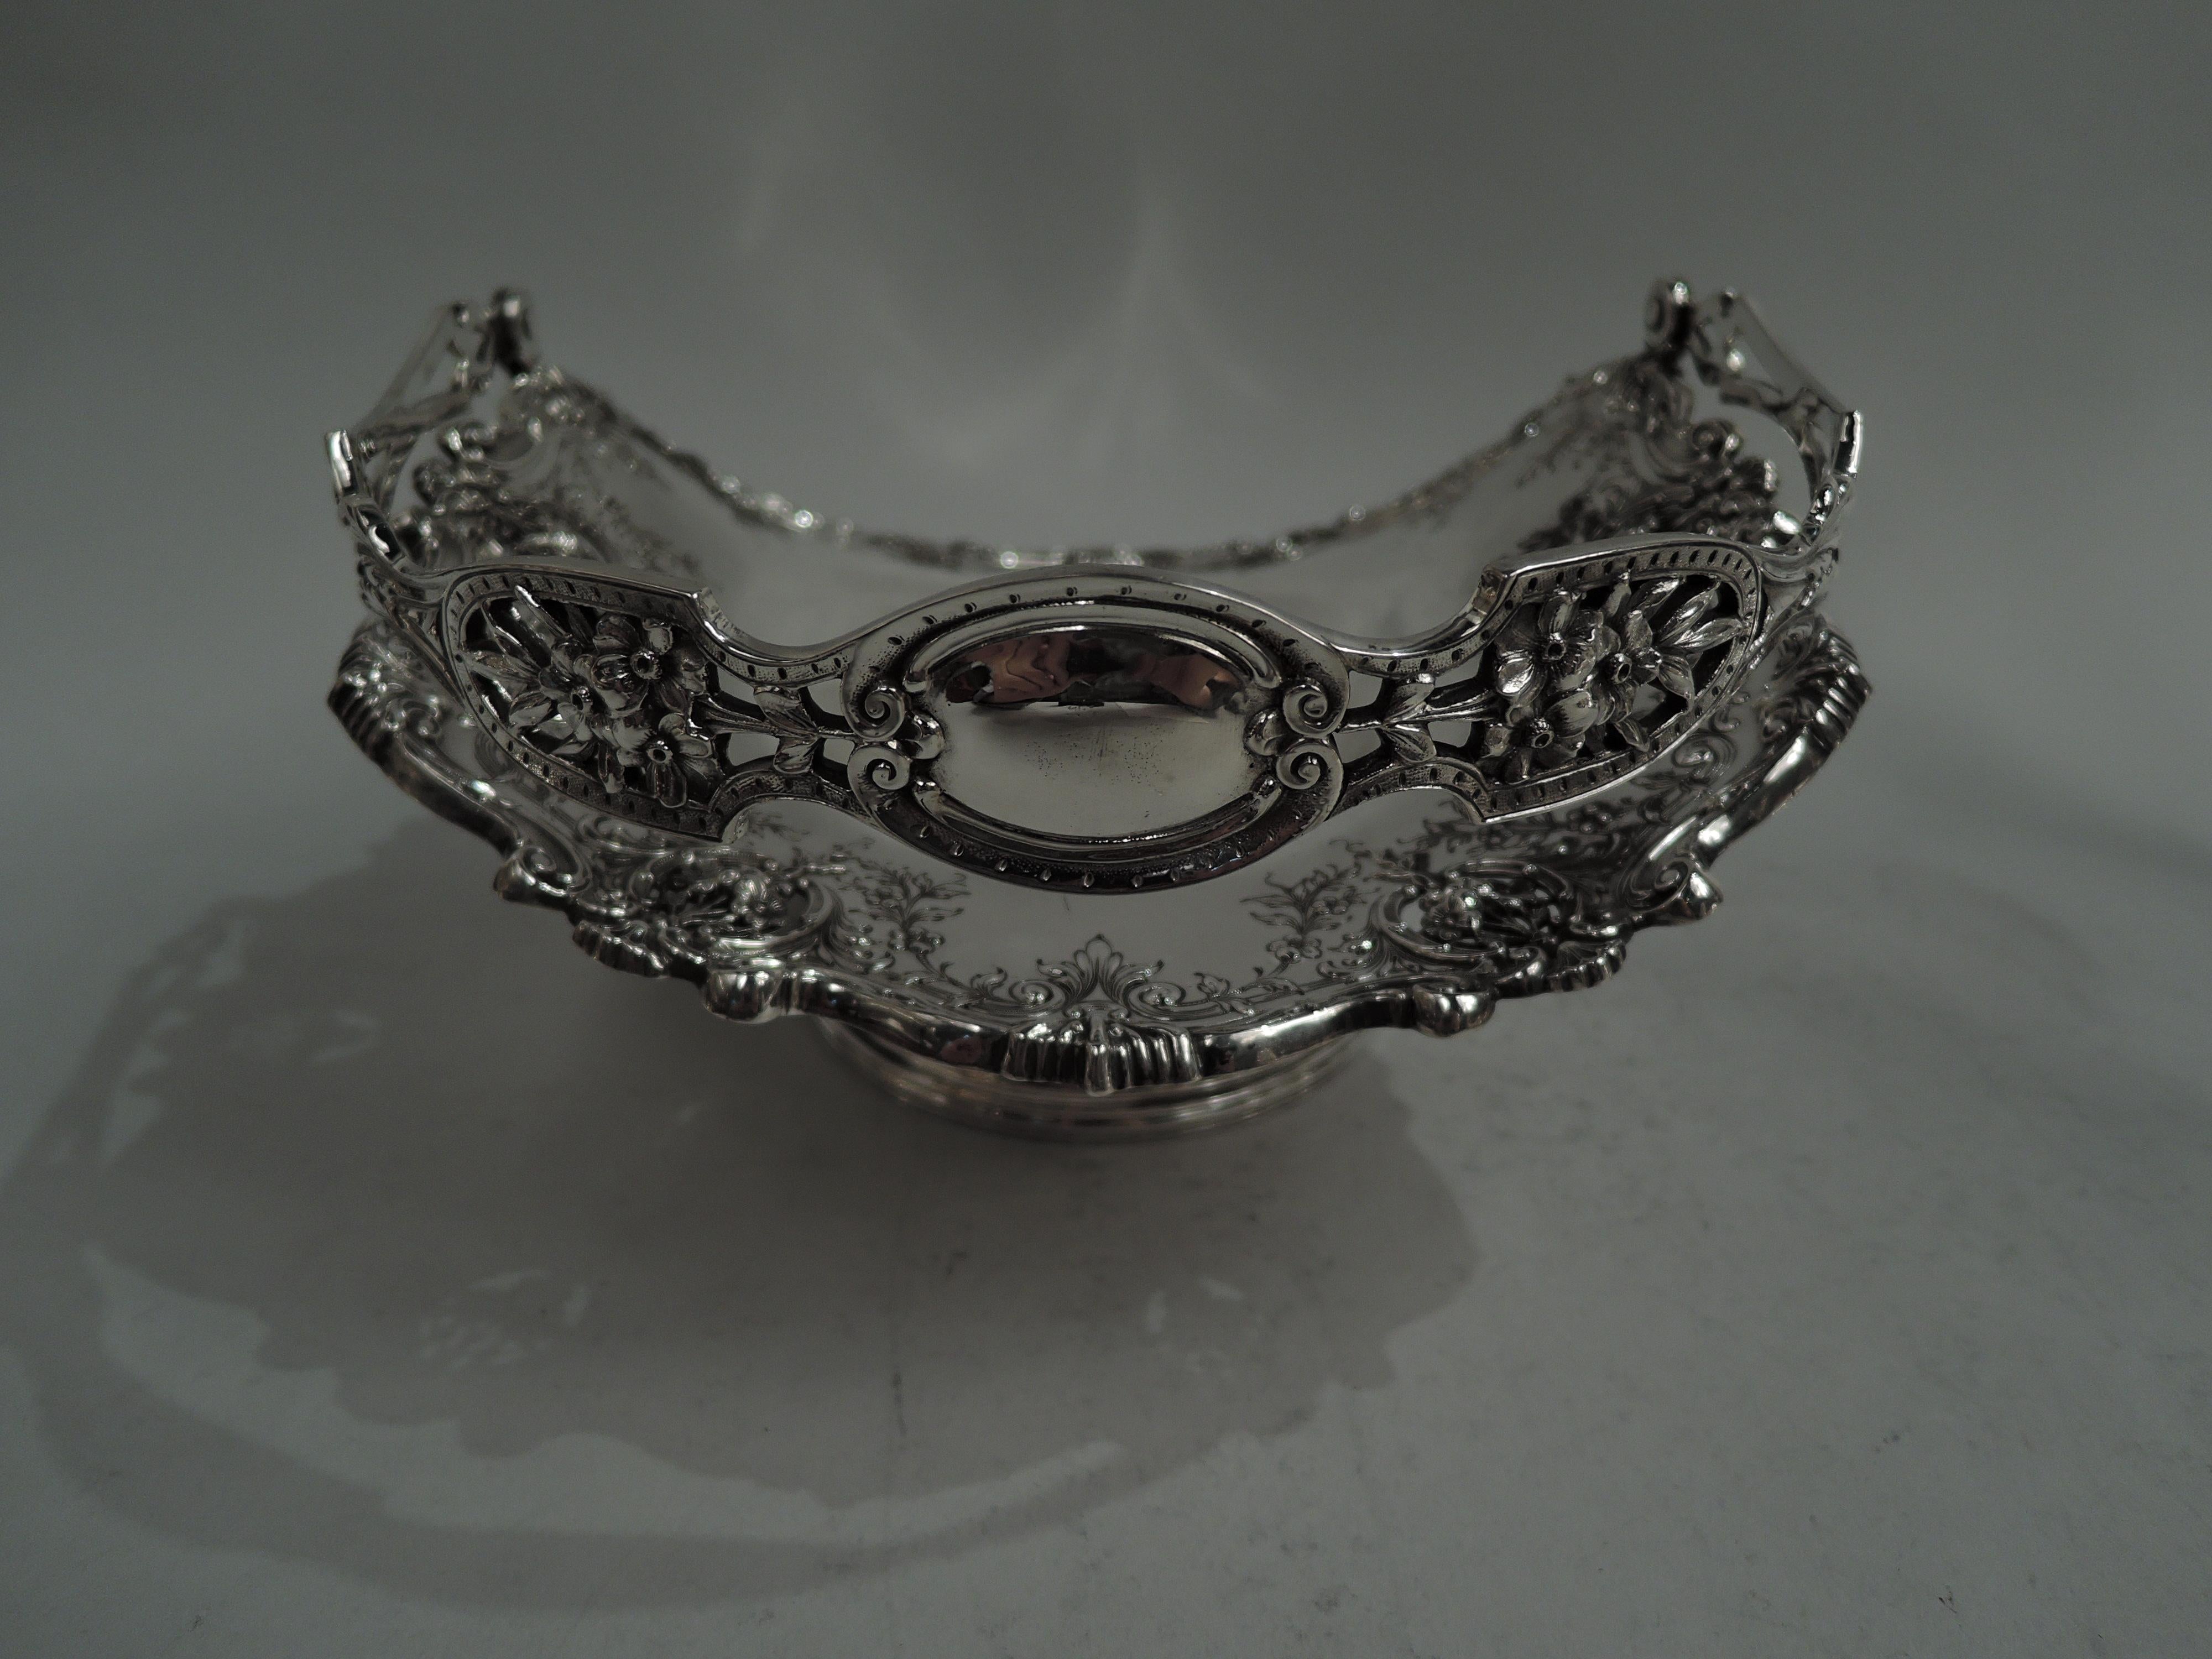 Fancy American Victorian sterling silver basket, ca 1890. Retailed by Tiffany & Co. in New York. Oval well and wide flared mouth; spread and reeded foot. Rim interior has cast scrolls, shells, and leaves with pendant flowers in open scroll rondels